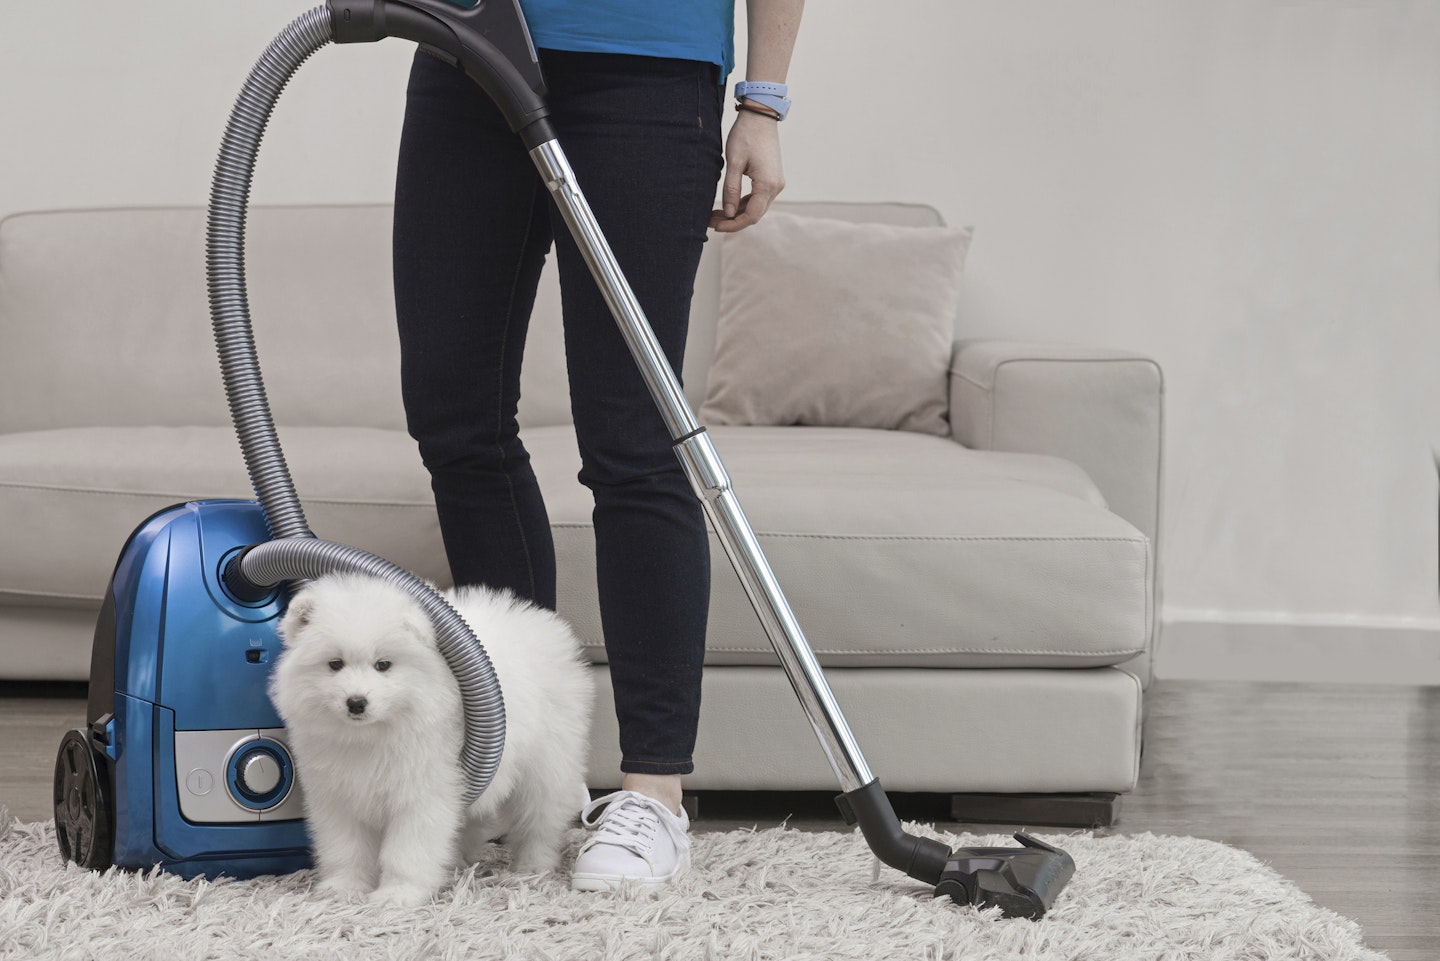 dog standing next to hoover